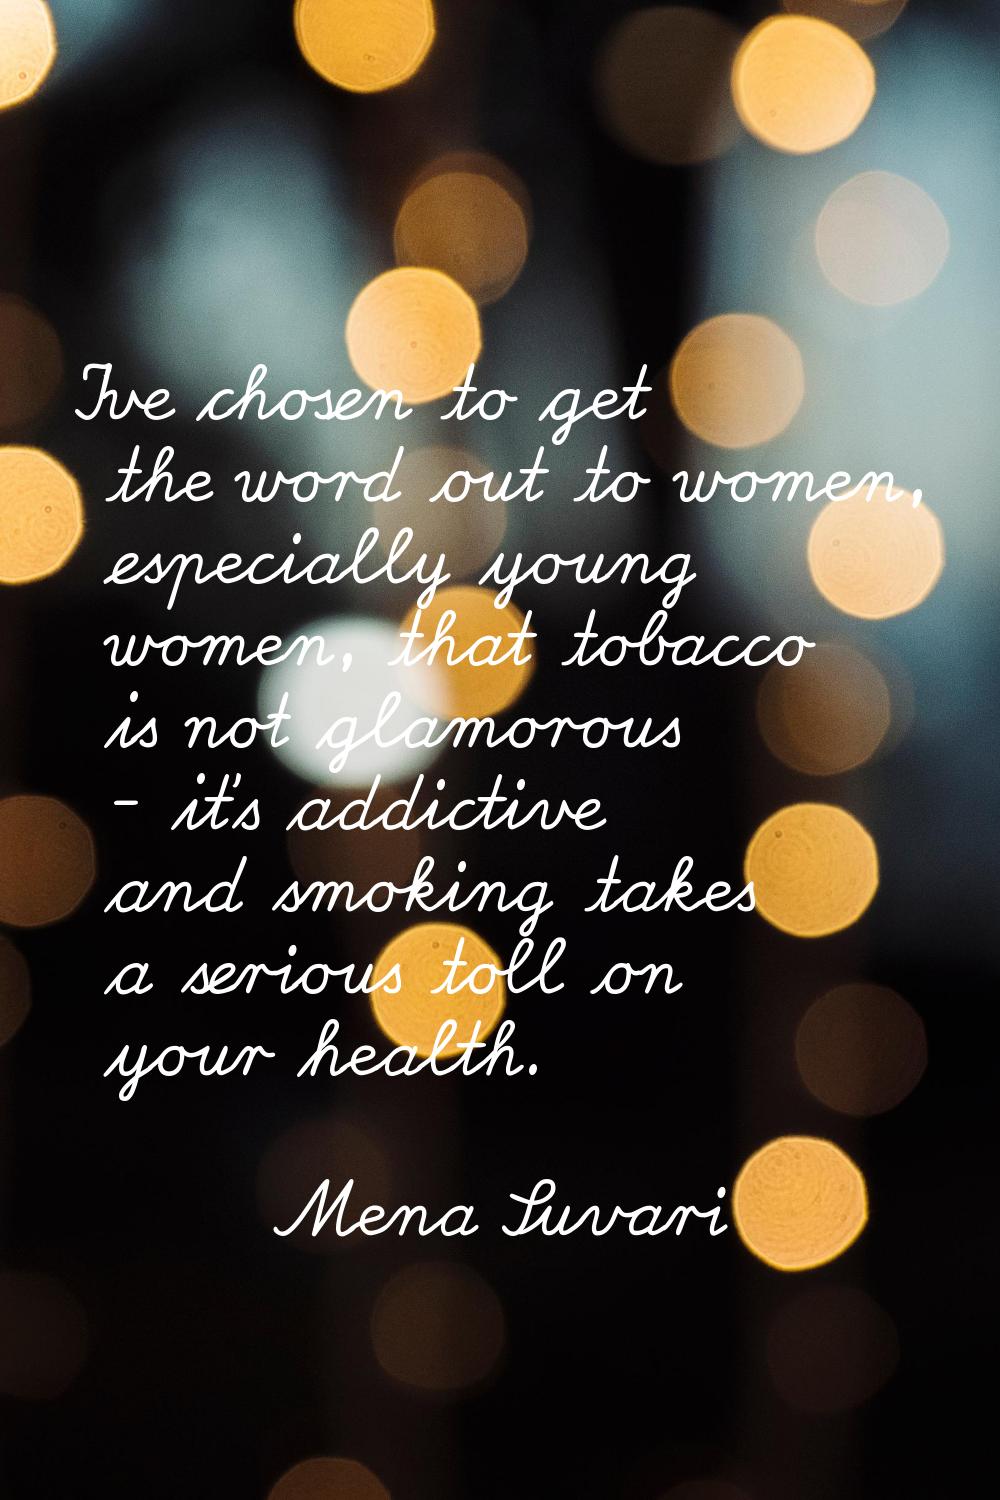 I've chosen to get the word out to women, especially young women, that tobacco is not glamorous - i